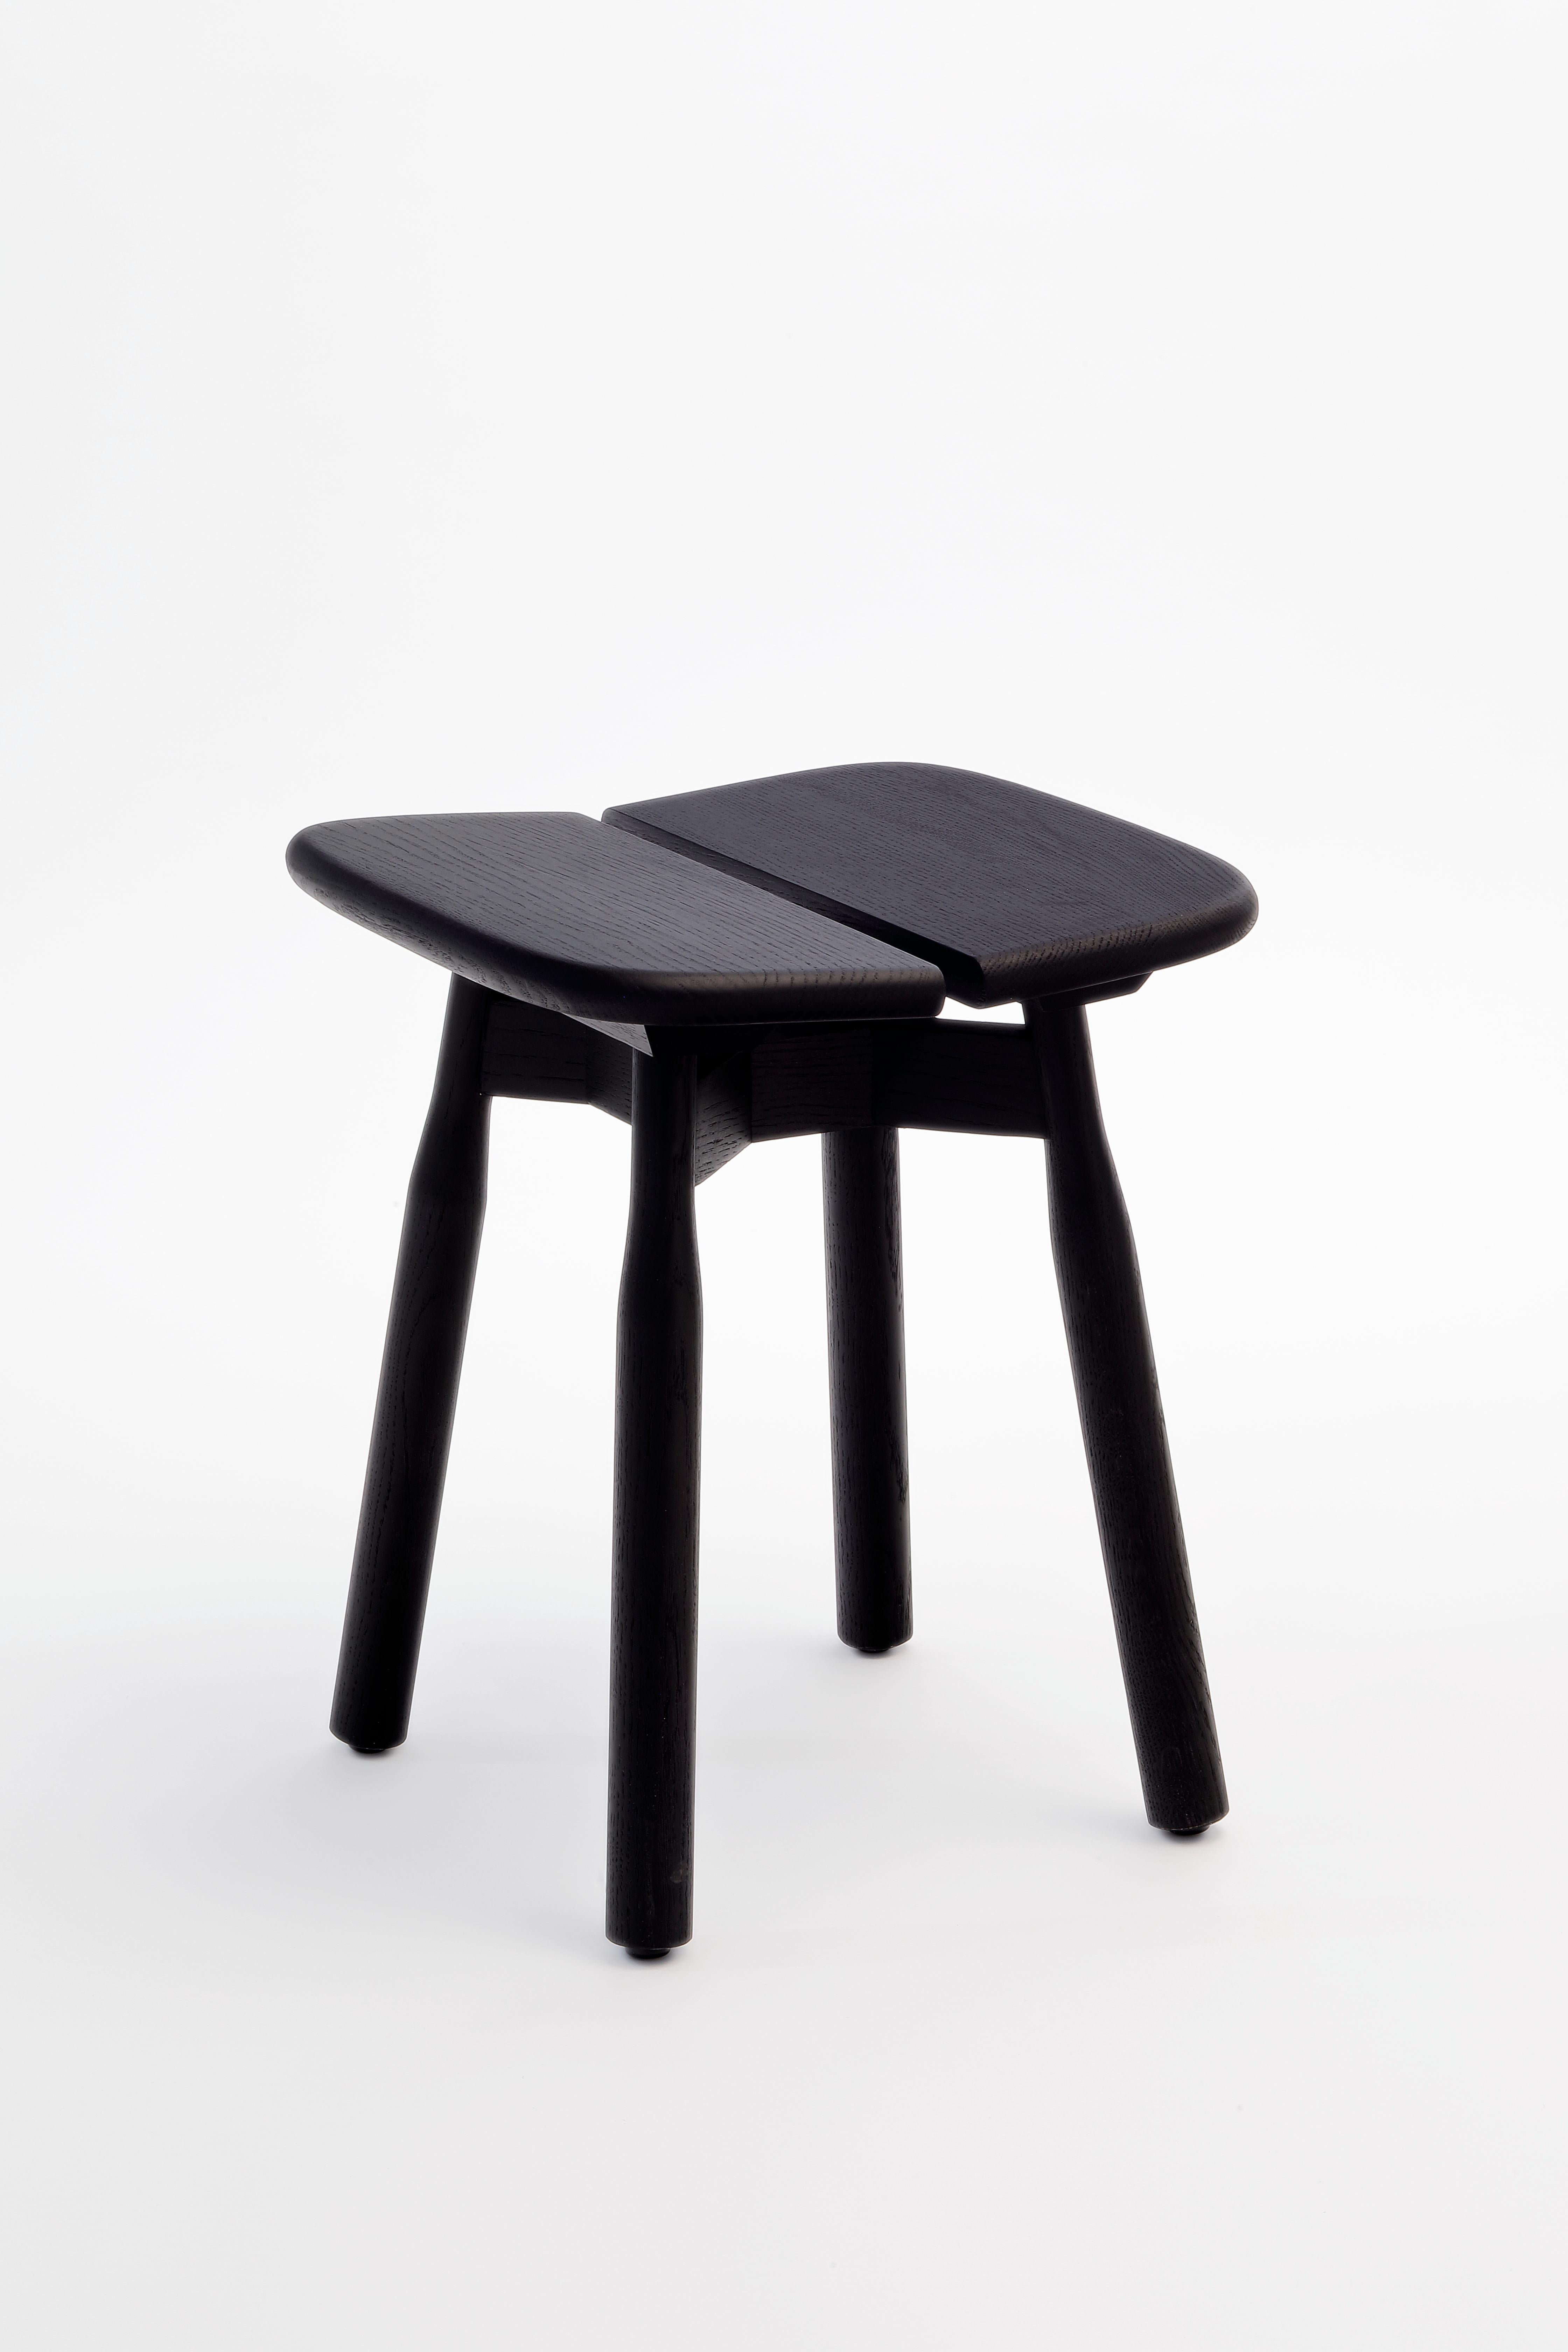 Black stained oak DOM stool by Marcos Zanuso Jr
Materials: Low stool, structure, and seat in solid oak, natural varnished or black stained.
Technique: Lacquered metal. Natural or stained wood. 
Dimensions: D 38 x W 40 x H 46 cm


Marco Zanuso JR,